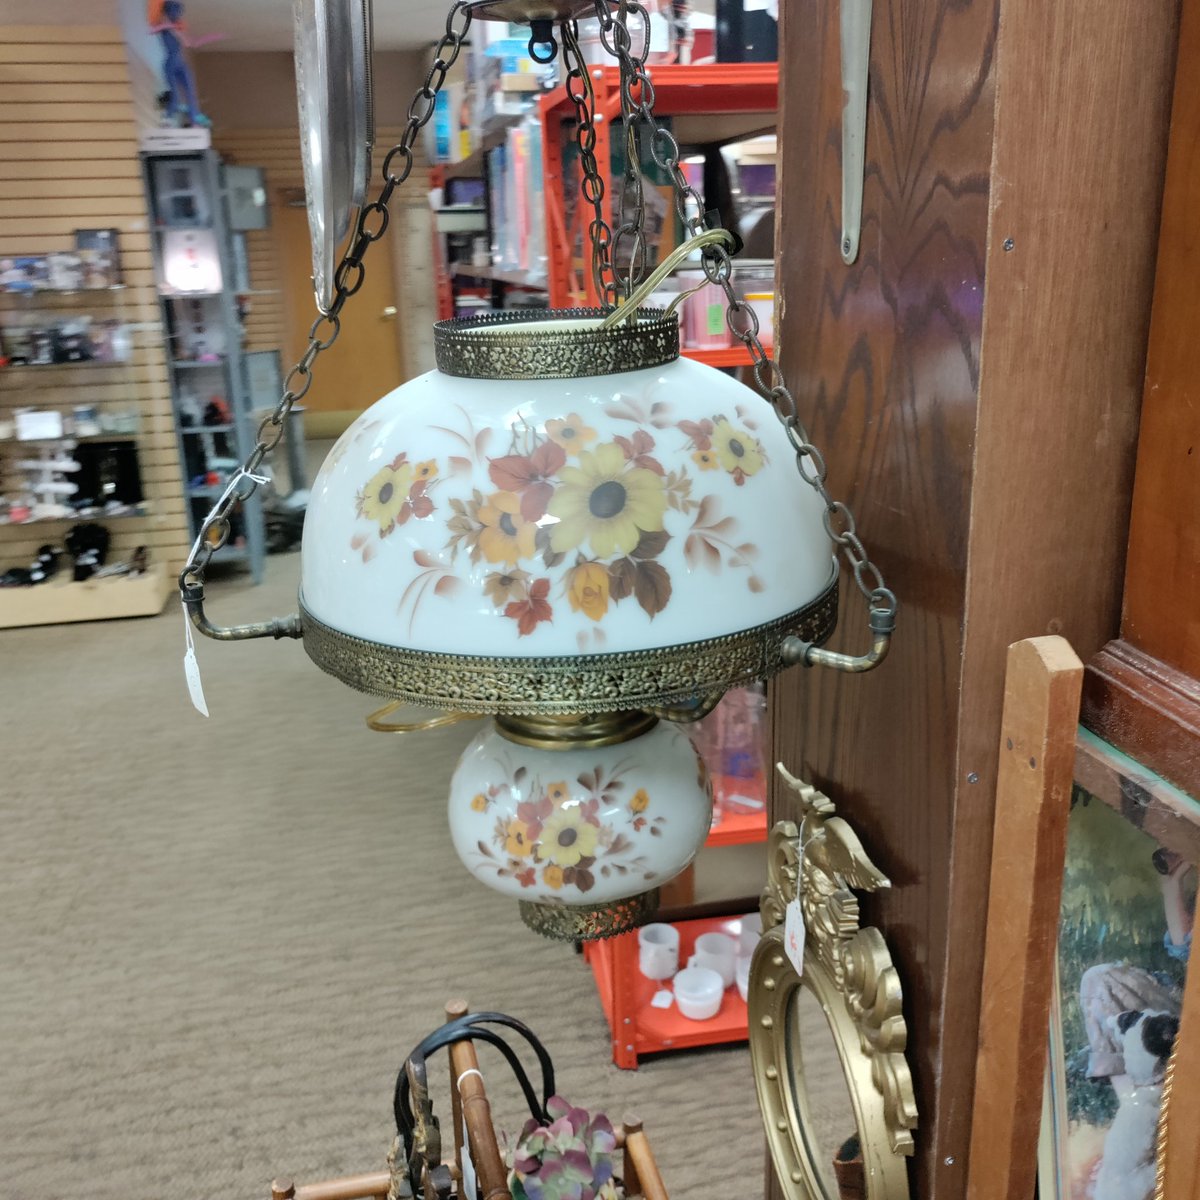 Need to light up your life? Stop in to see us and add that perfect piece to your collection.

#vintagelights #vintagestyle #lamps #70s #60sdecor